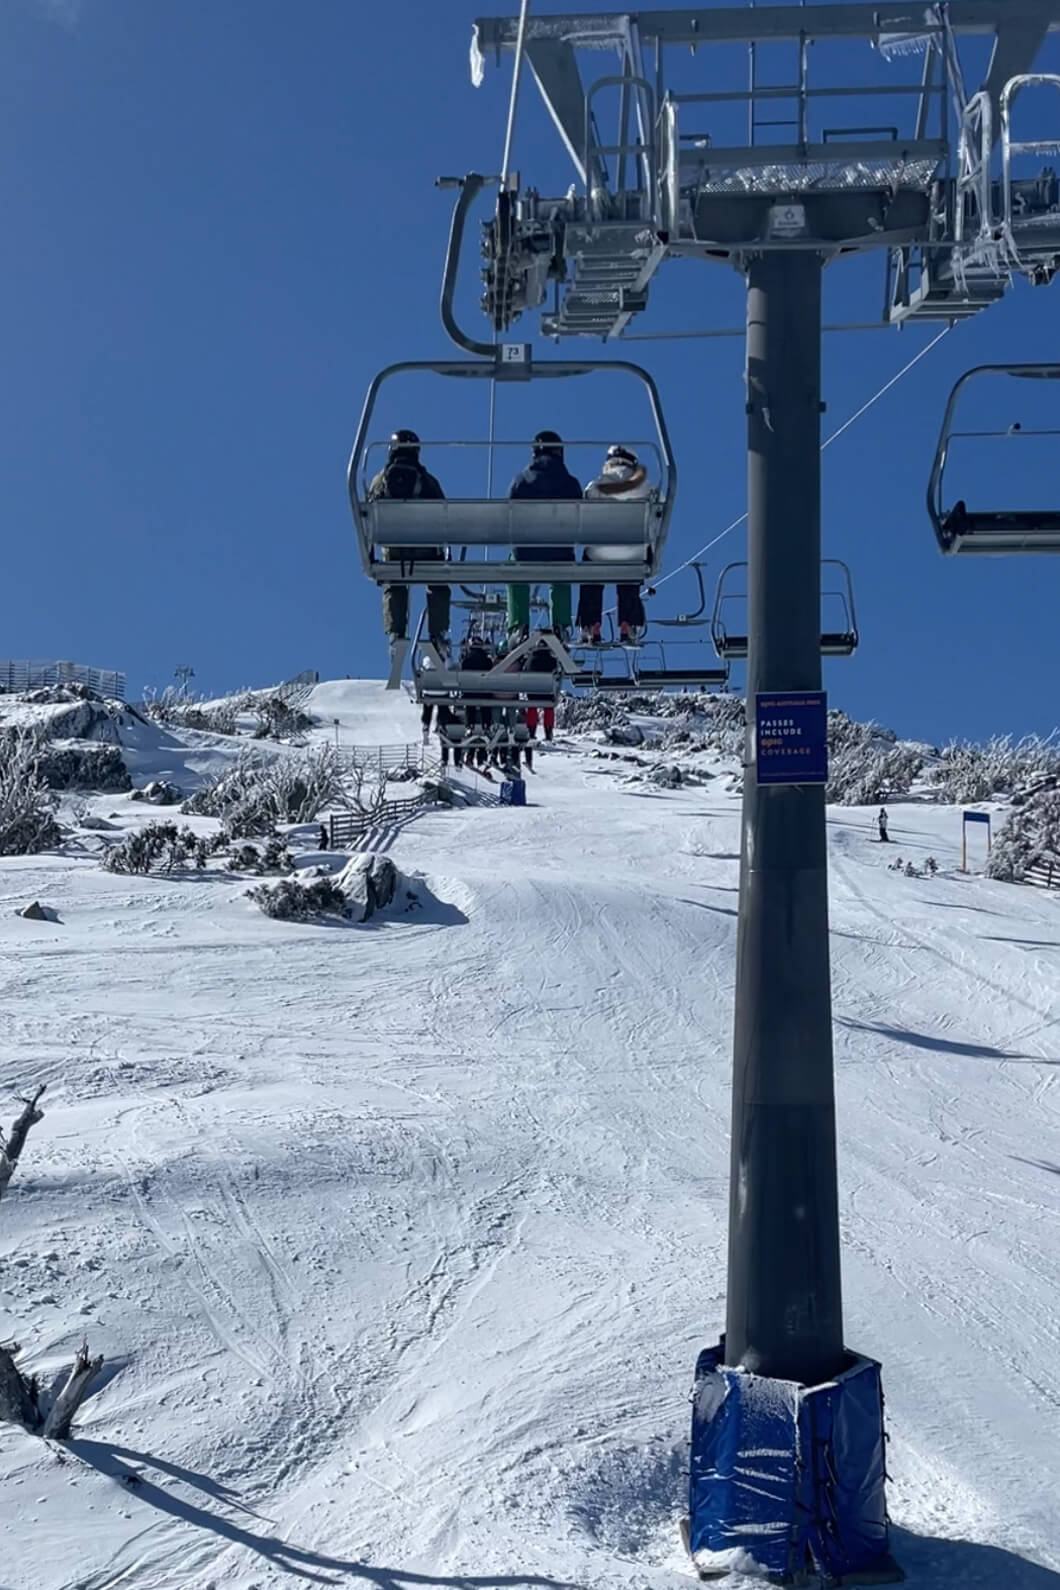 A complete guide to skiing in Perisher